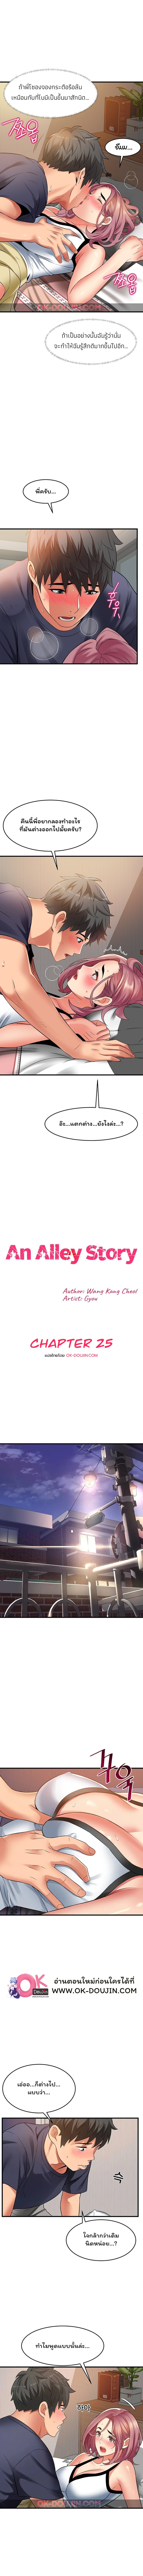 An Alley Story 25 (1)